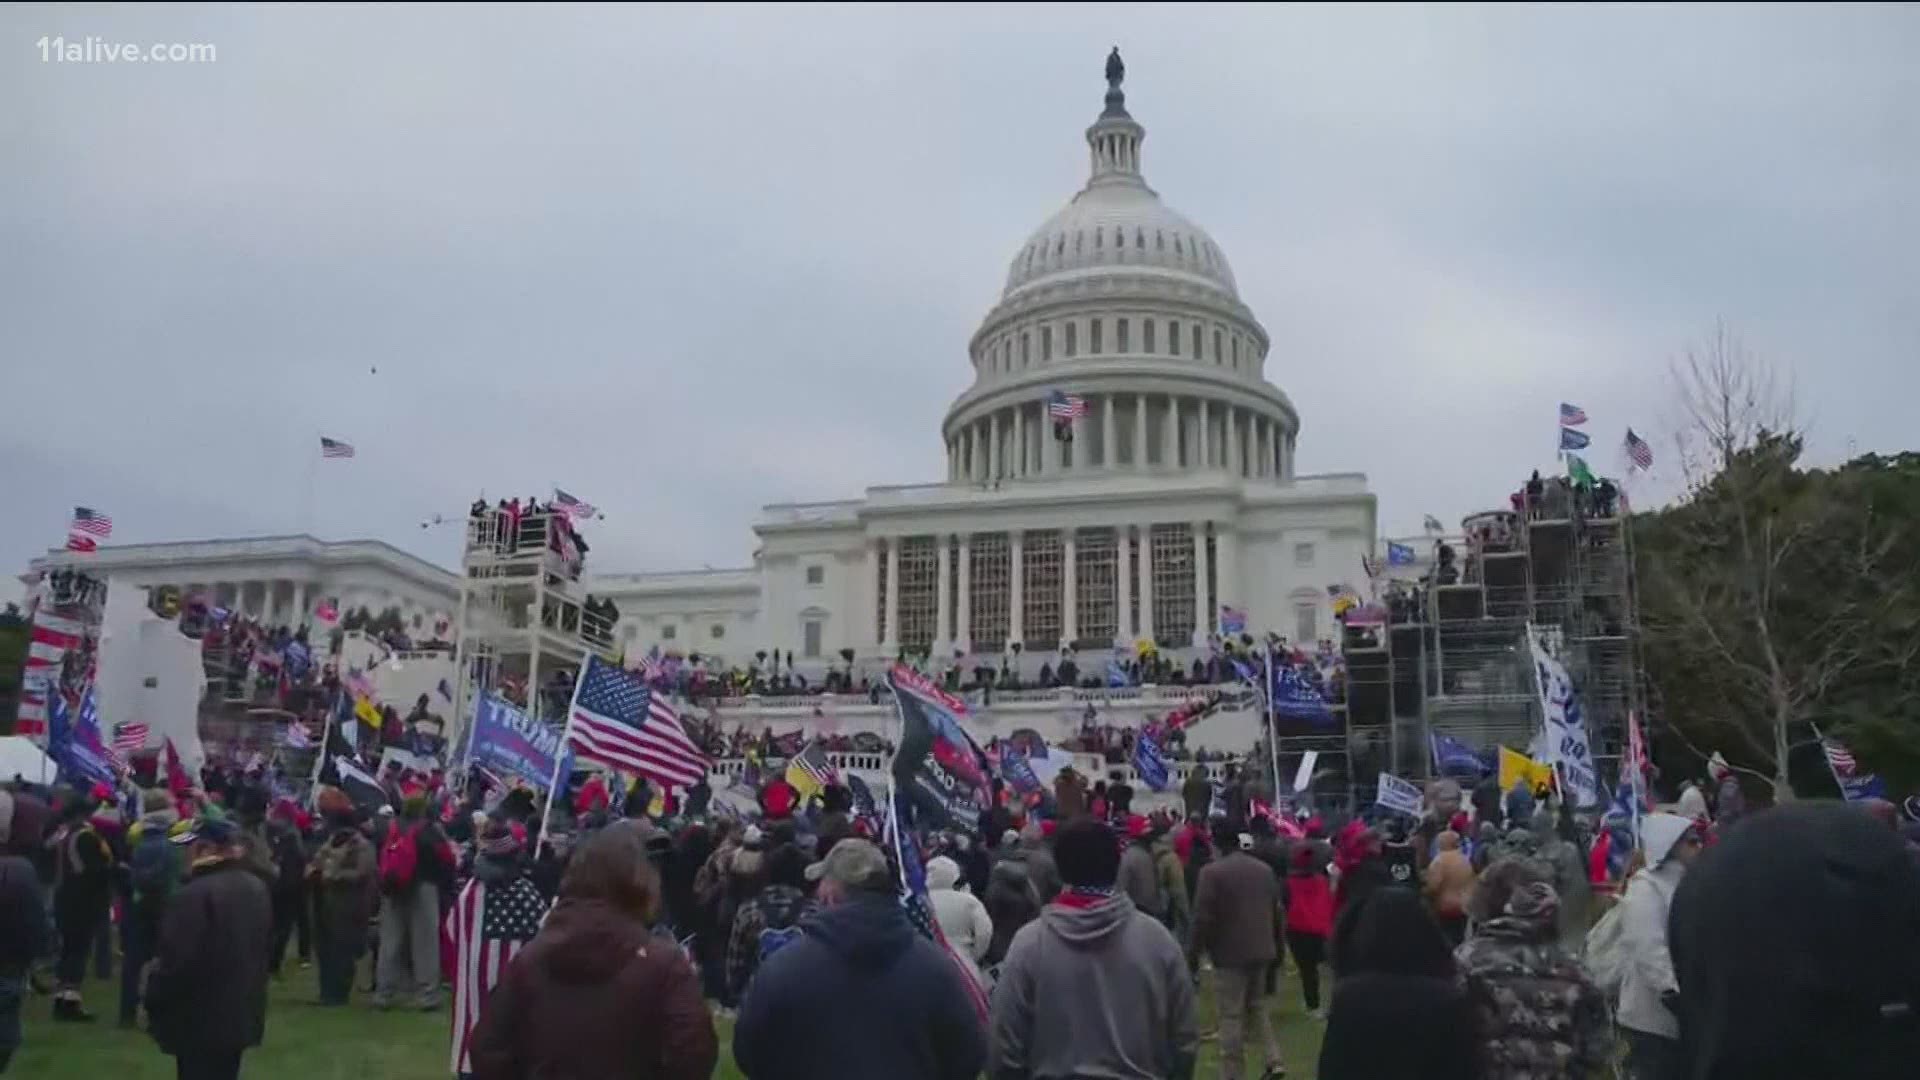 Inauguration Day is on Jan. 20 and officials are making adjustments following the Capitol riots.